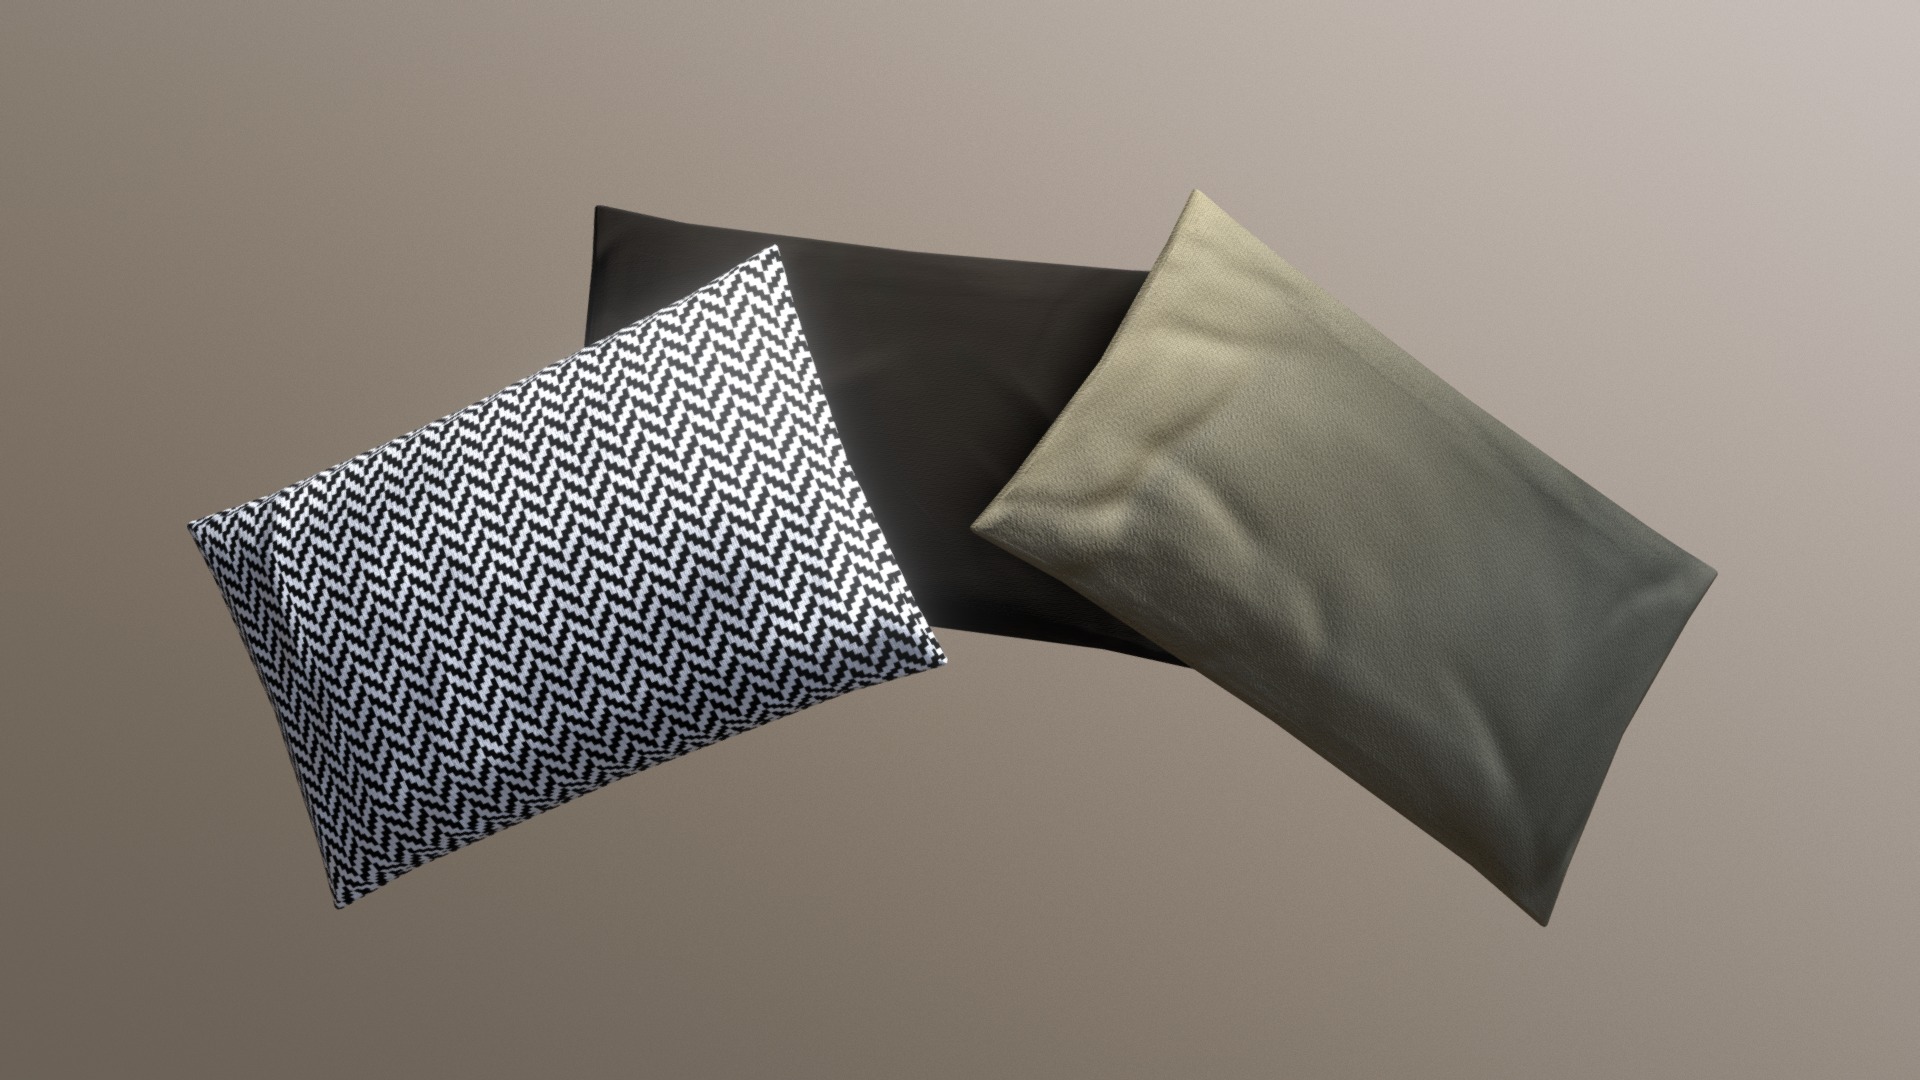 3D model Pillows - This is a 3D model of the Pillows. The 3D model is about a couple of black and white cubes.